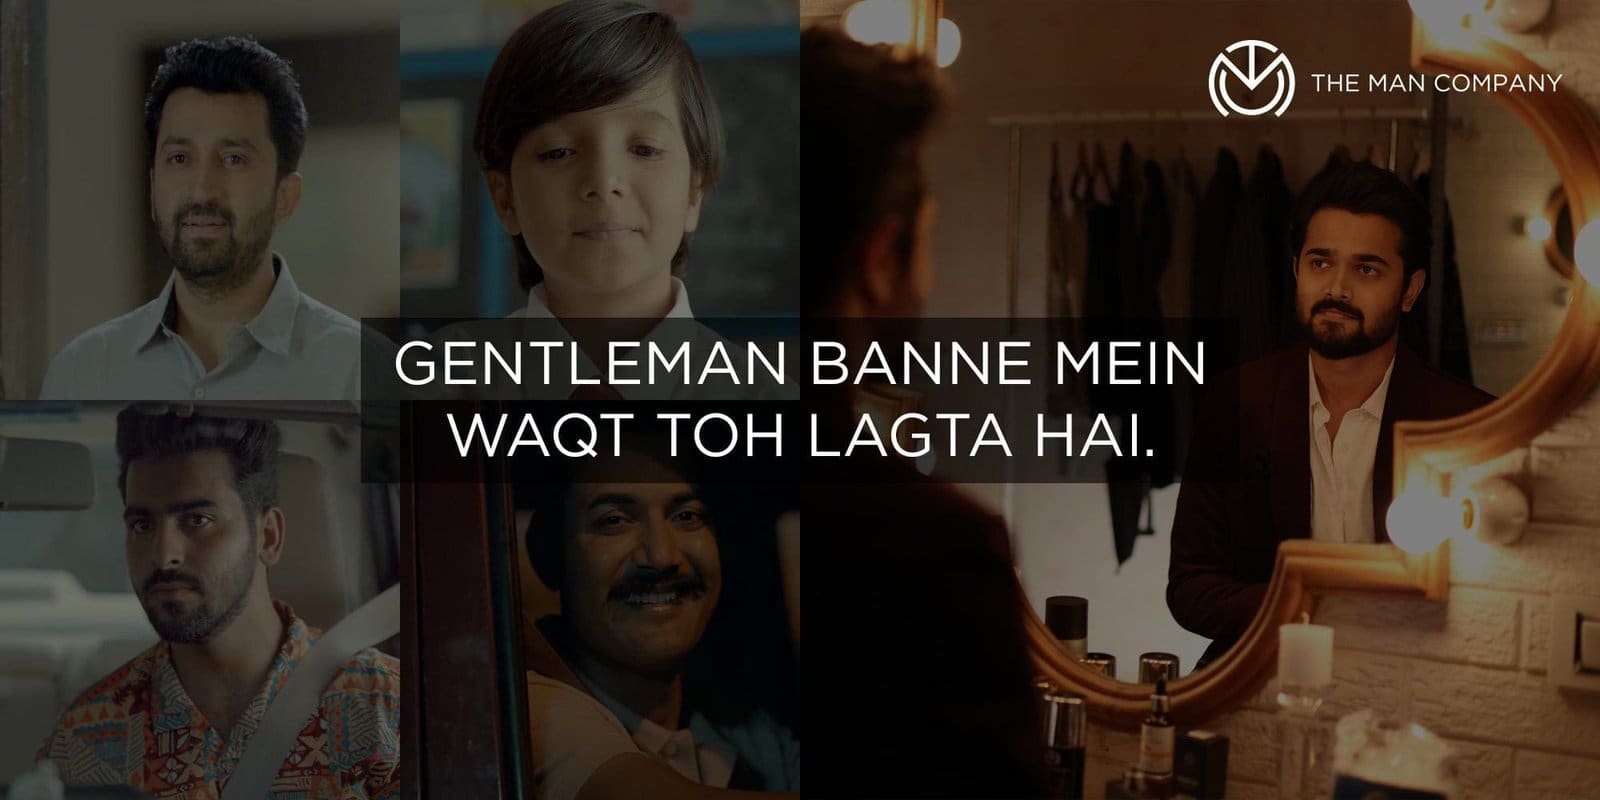 INTERNATIONAL MEN’S DAY: THE MAN COMPANY AND BHUVAN BAM SHOW’S STIRRING NEW VIDEO, “THE JOURNEY TO BECOME A GENTLEMAN,”